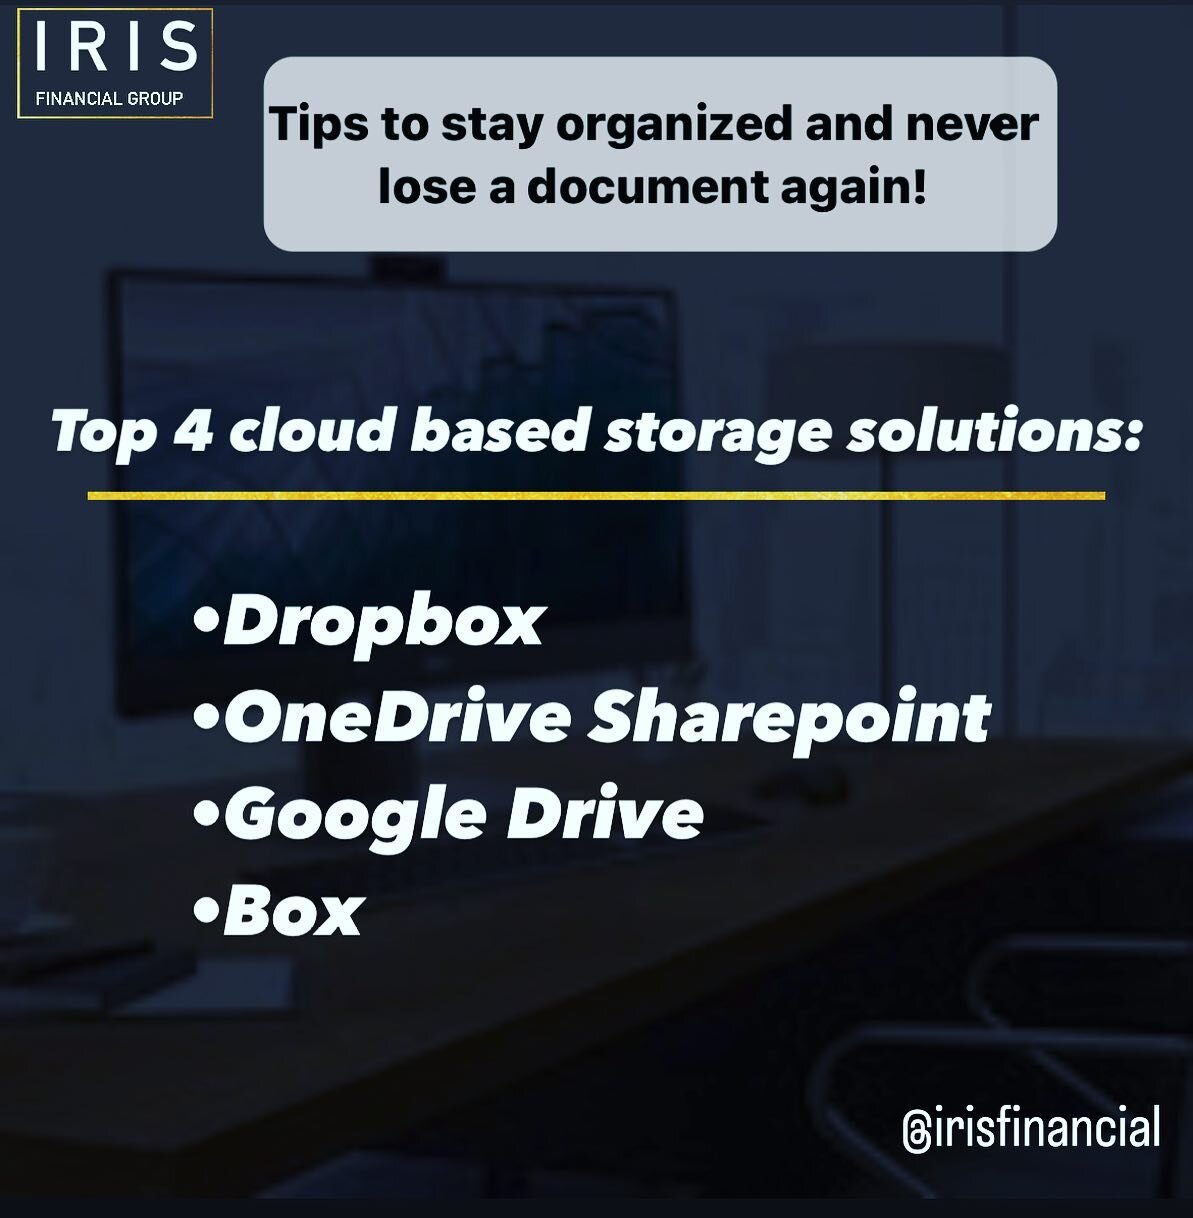 Tips to stay organized and never lose a document again! 

Top 4 cloud based storage solutions:

Dropbox
OneDrive Sharepoint
Google Drive 
Box 

#iris #accounting #irisfinancialgroup 
#financialeducation #financialgoals #business #bookkeeping #smallbu